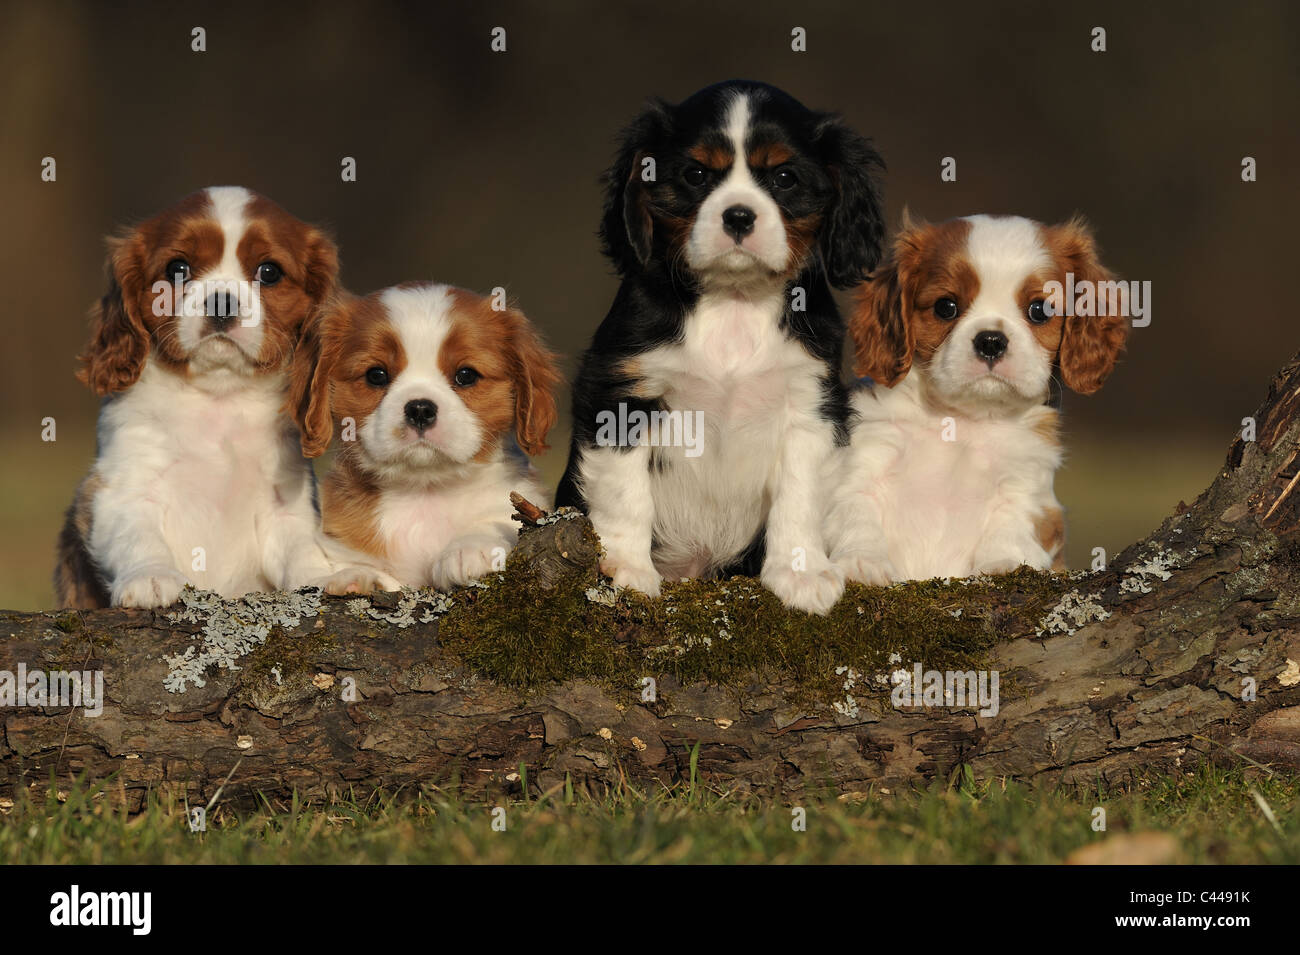 Cavalier King Charles Spaniel (Canis lupus familiaris), four puppies looking over a log. Stock Photo